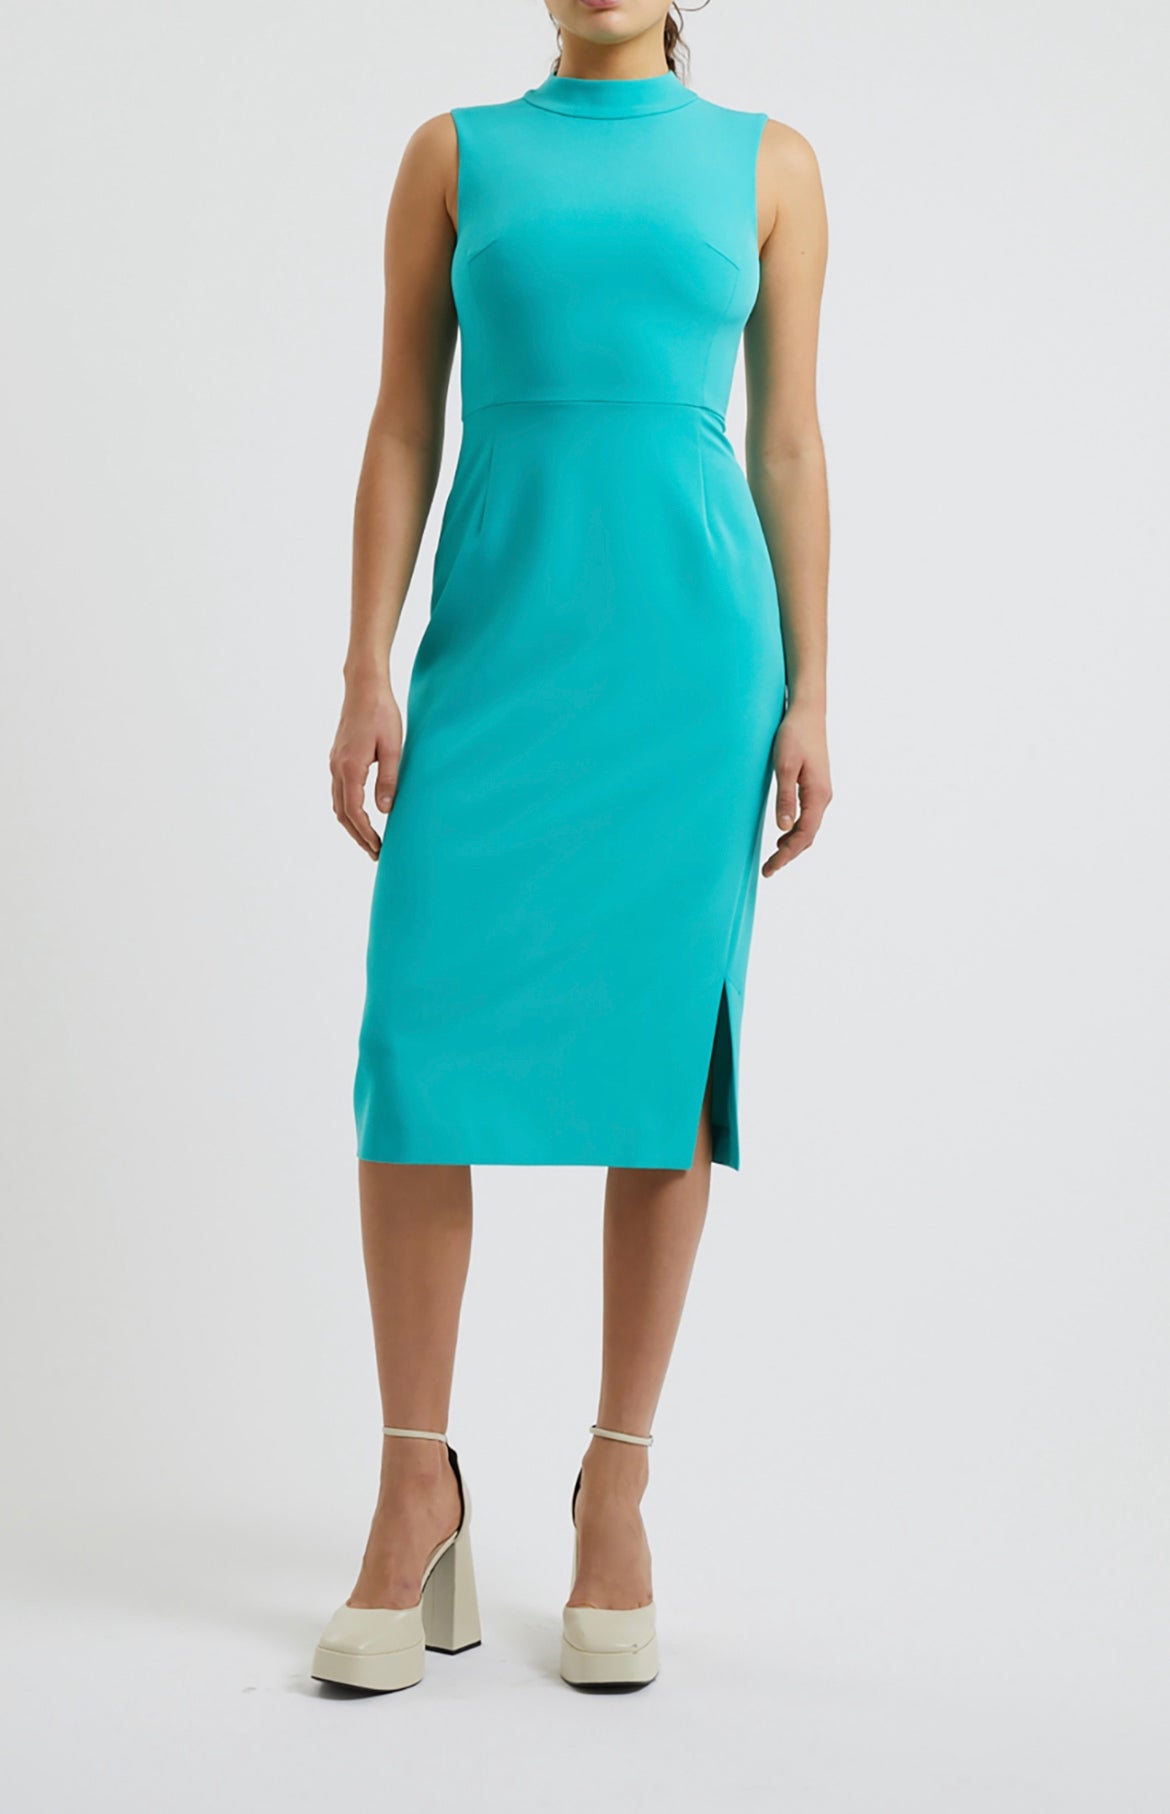 French Connection Echo Crepe Mock Neck Dress, Jaded Teal 71VEB